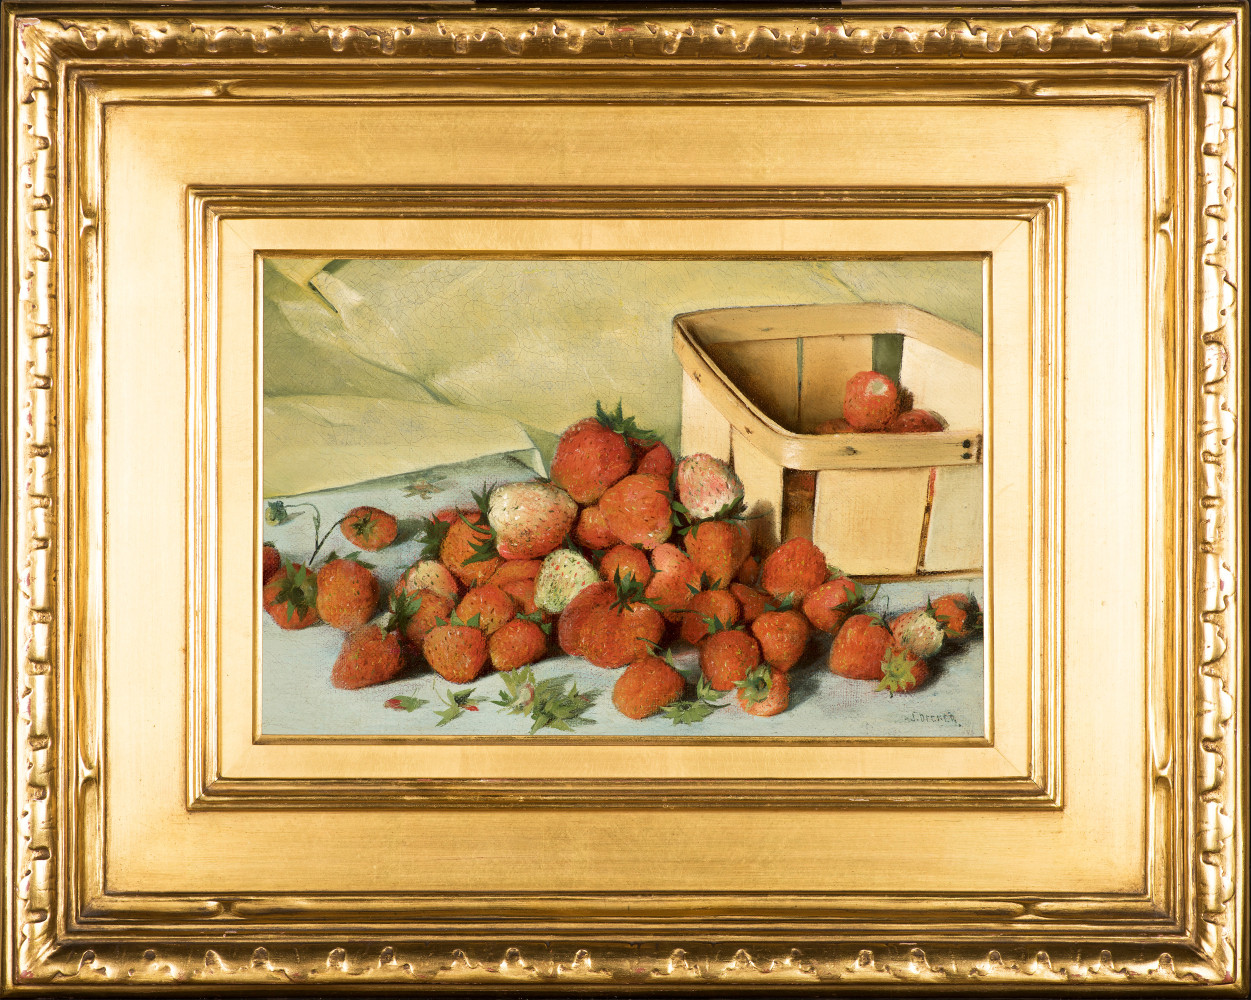 Joseph Decker (1853–1924), Still Life with Strawberries, c. 1885, oil on canvas, 8 x 11 7/8 in., signed lower right: J. Decker (framed)